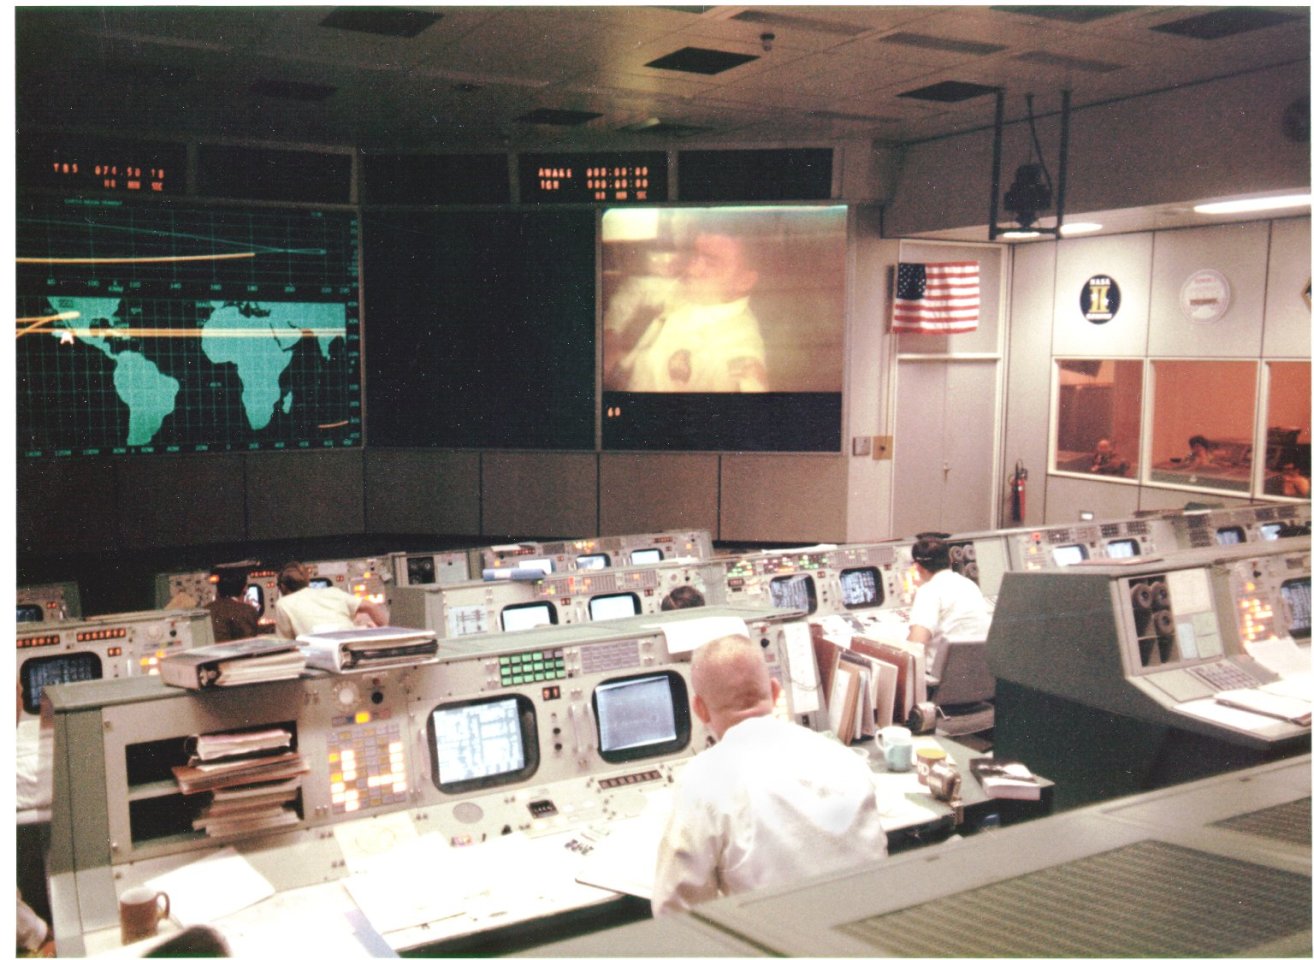 Mission Control in Houston